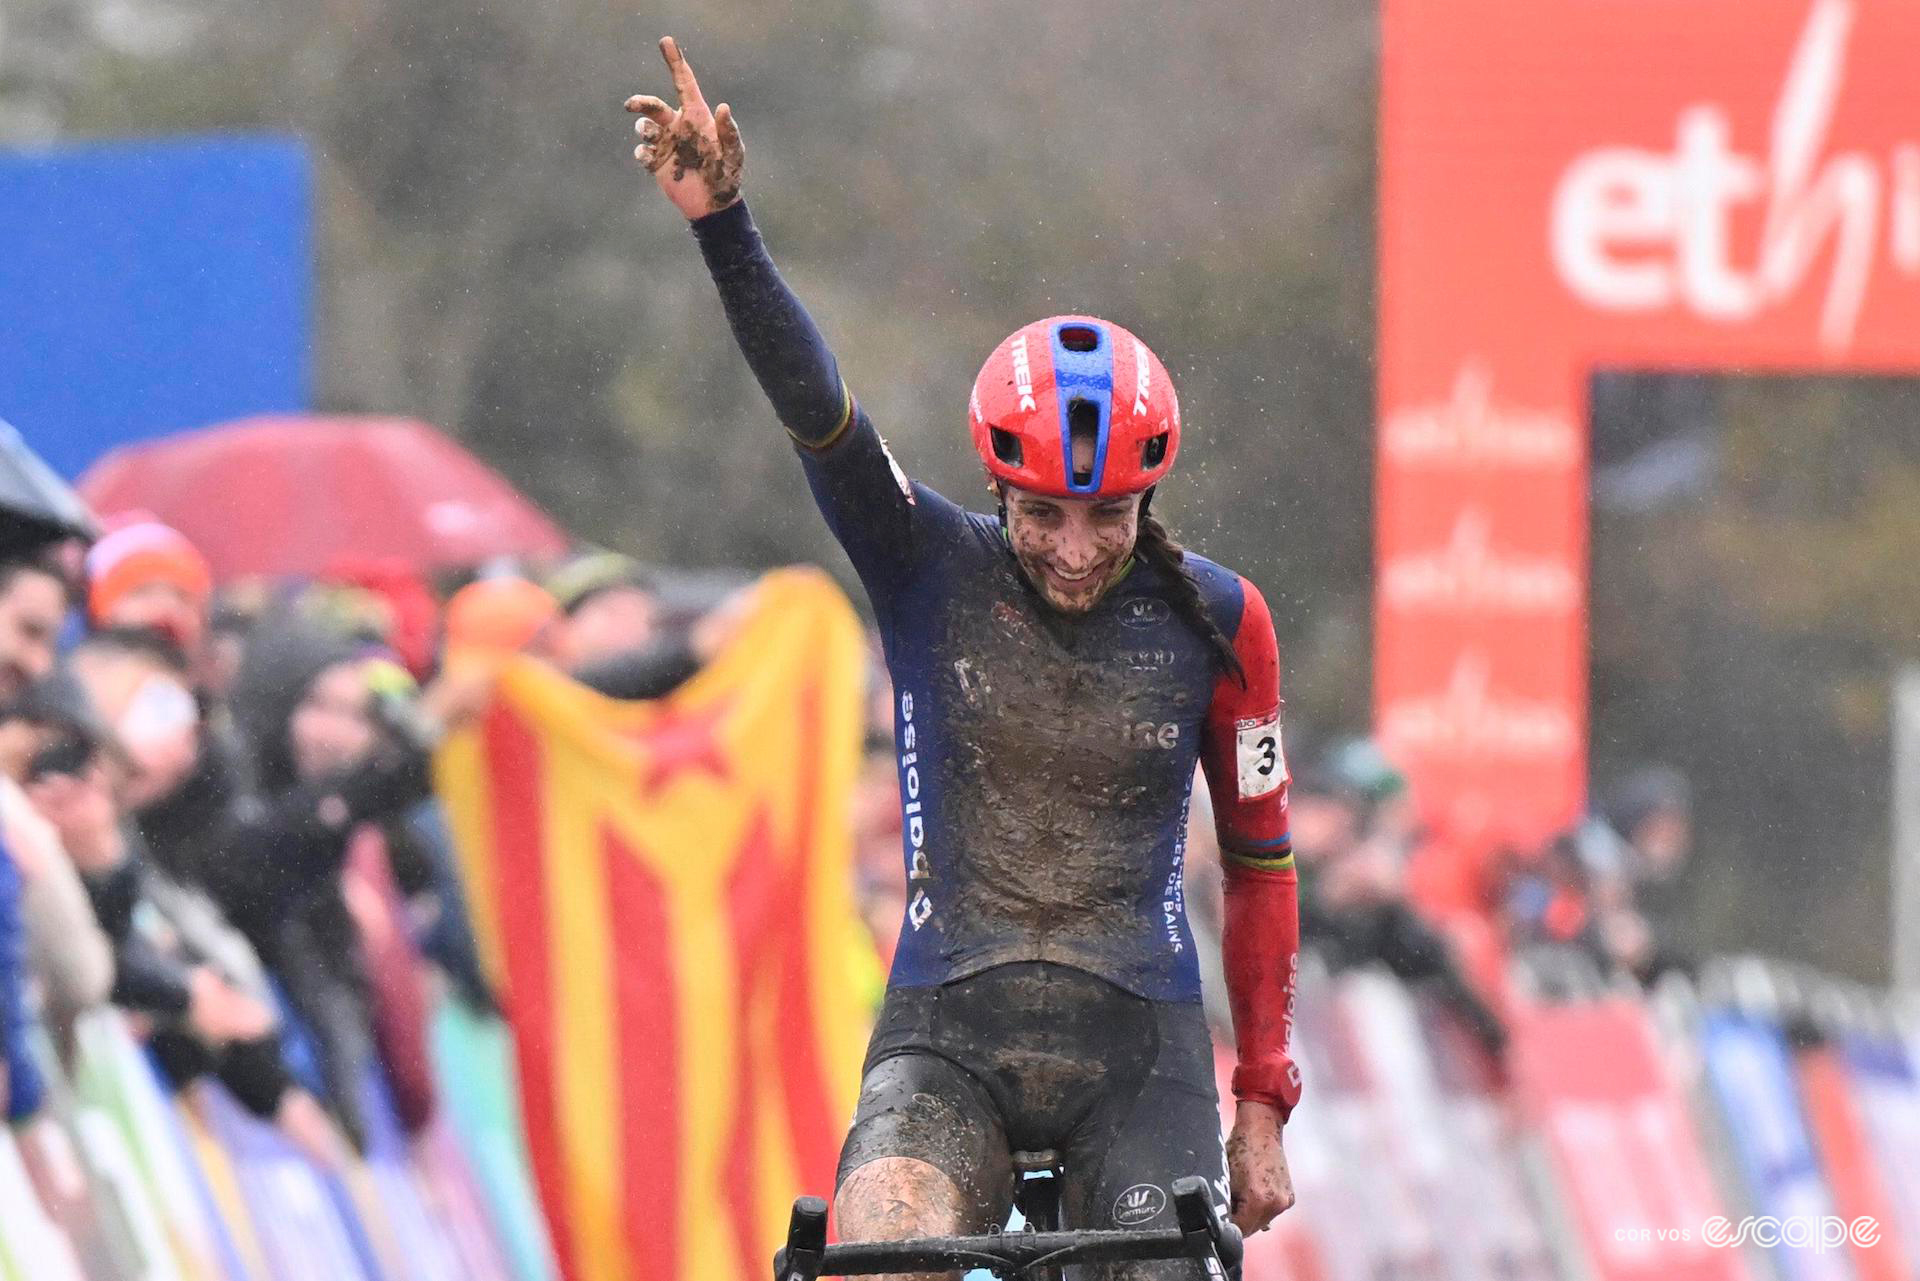 Medium shot of Lucinda Brand of Baloise Trek Lions, the front of her jersey caked in dark mud, as she smiles to herself and points one finger to the sky to celebrate victory at CX World Cup Dublin.